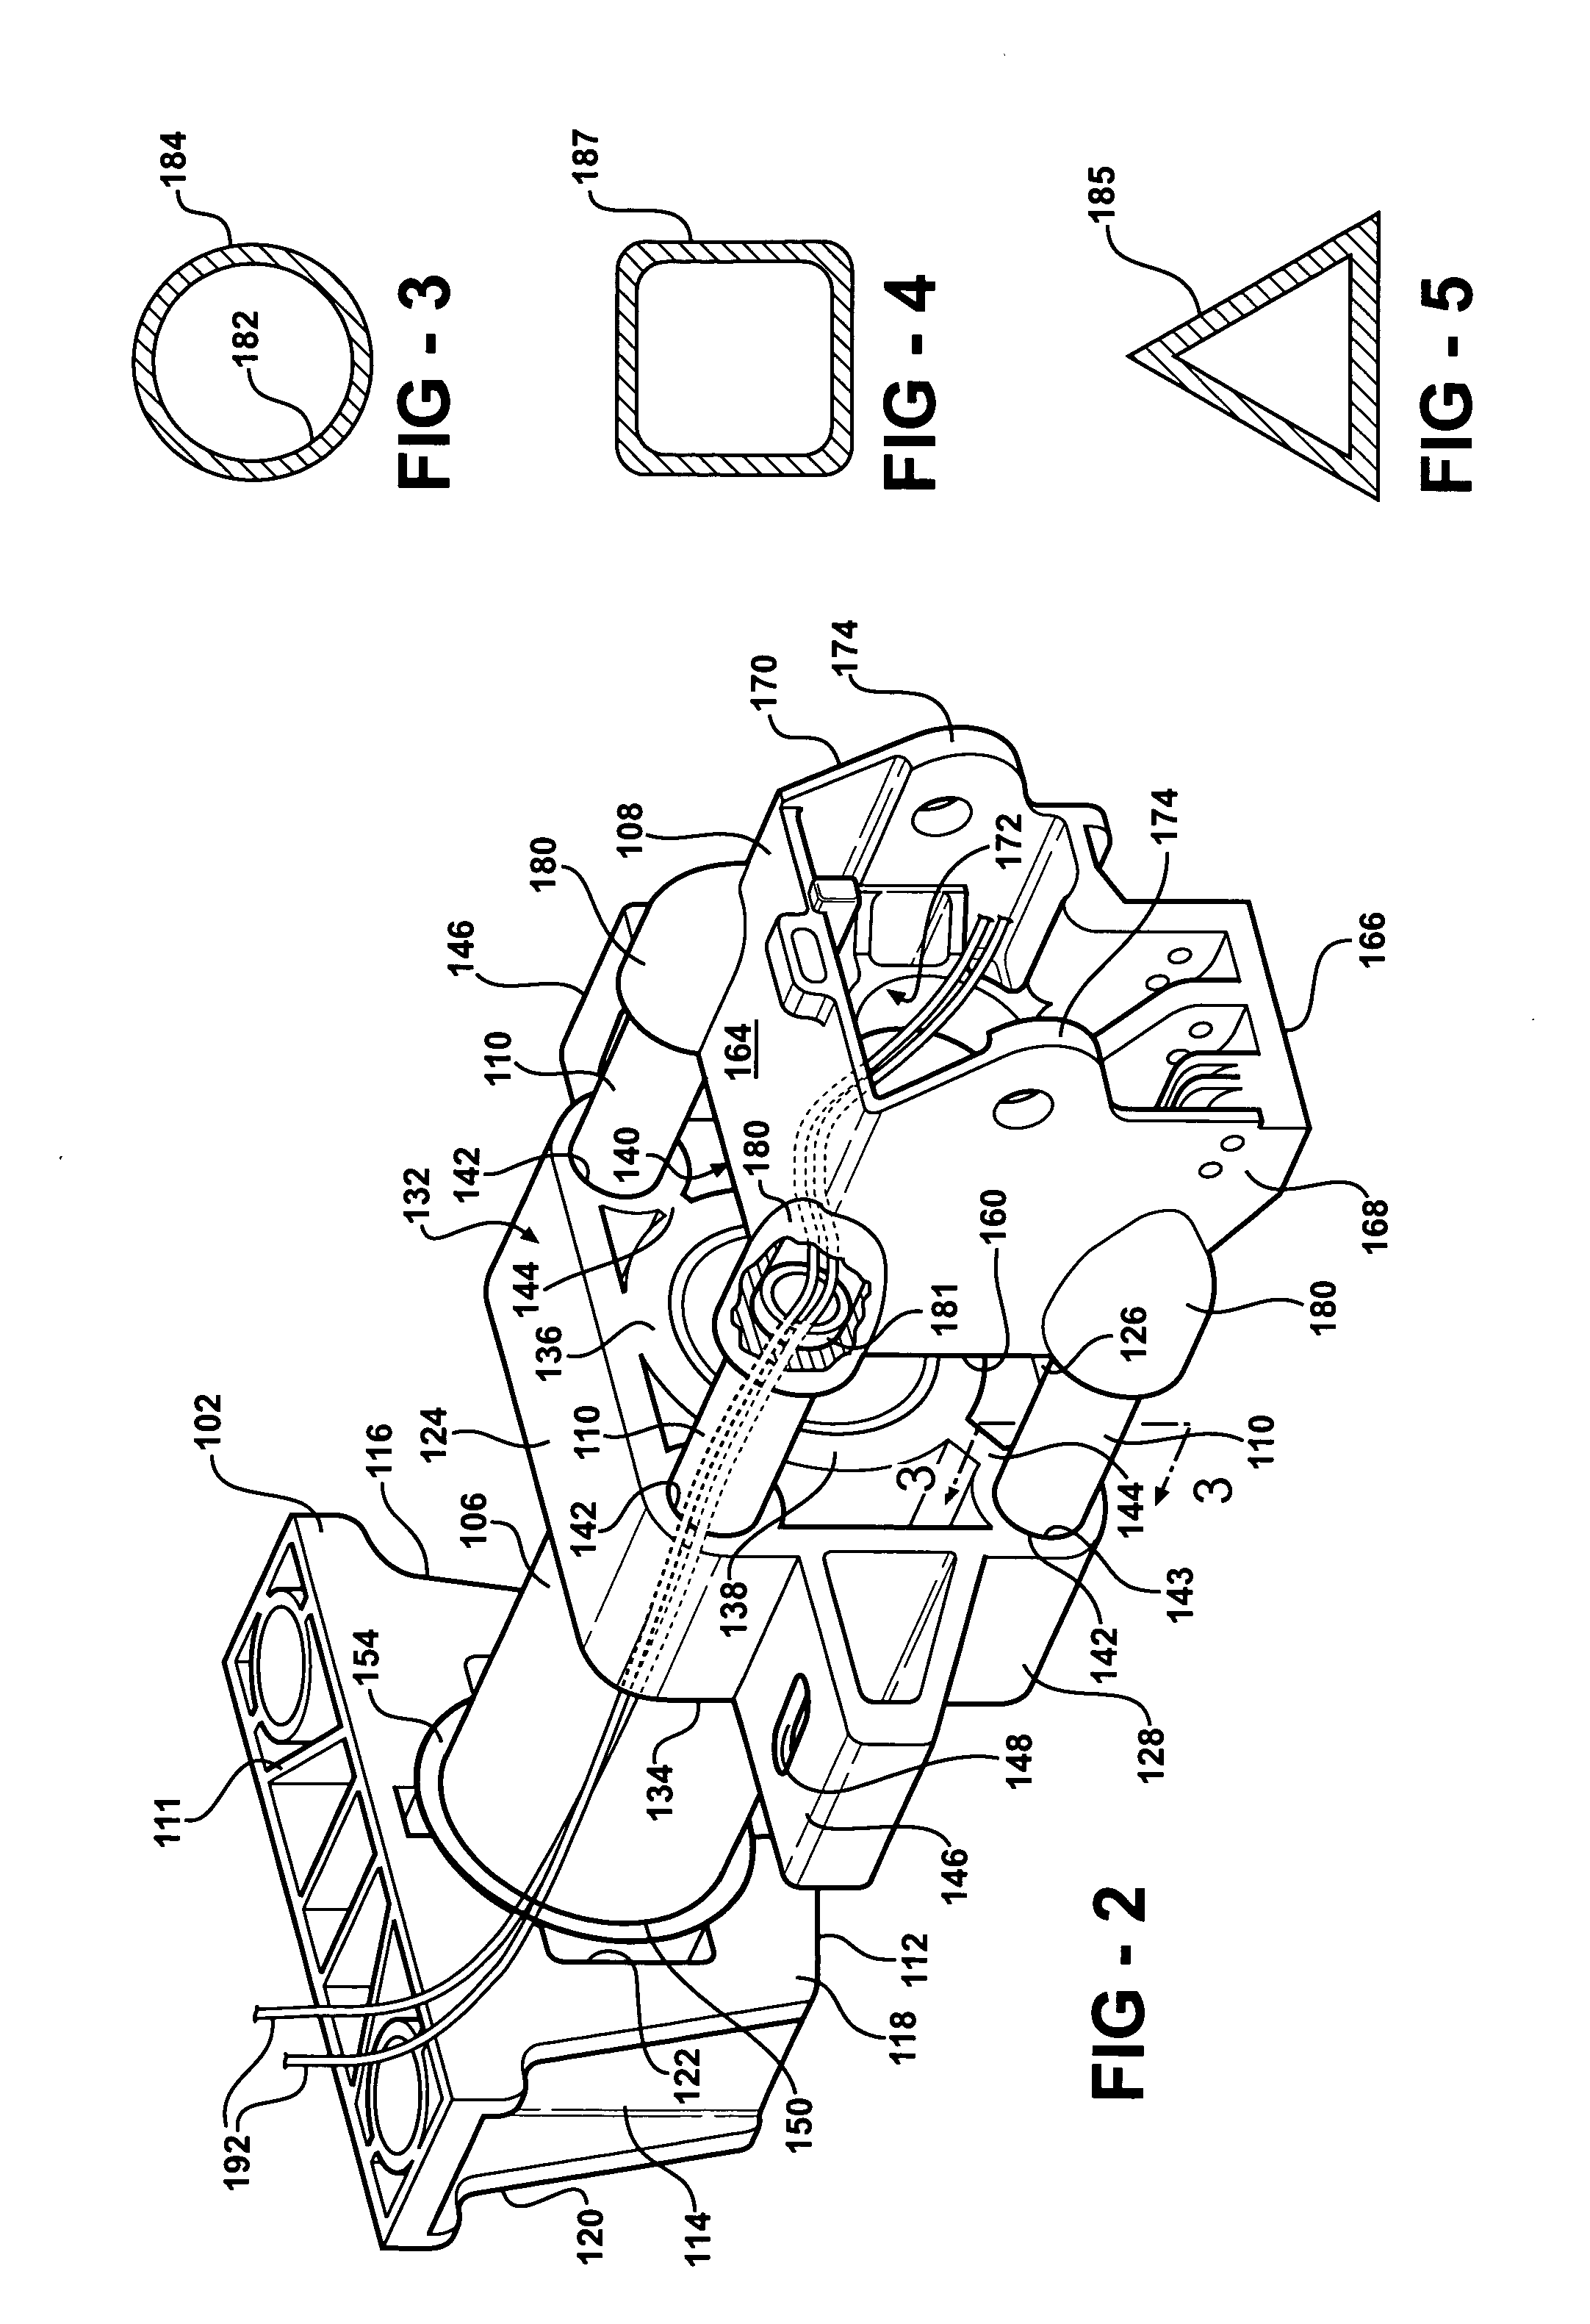 Steering column assembly and method of fabricating the same